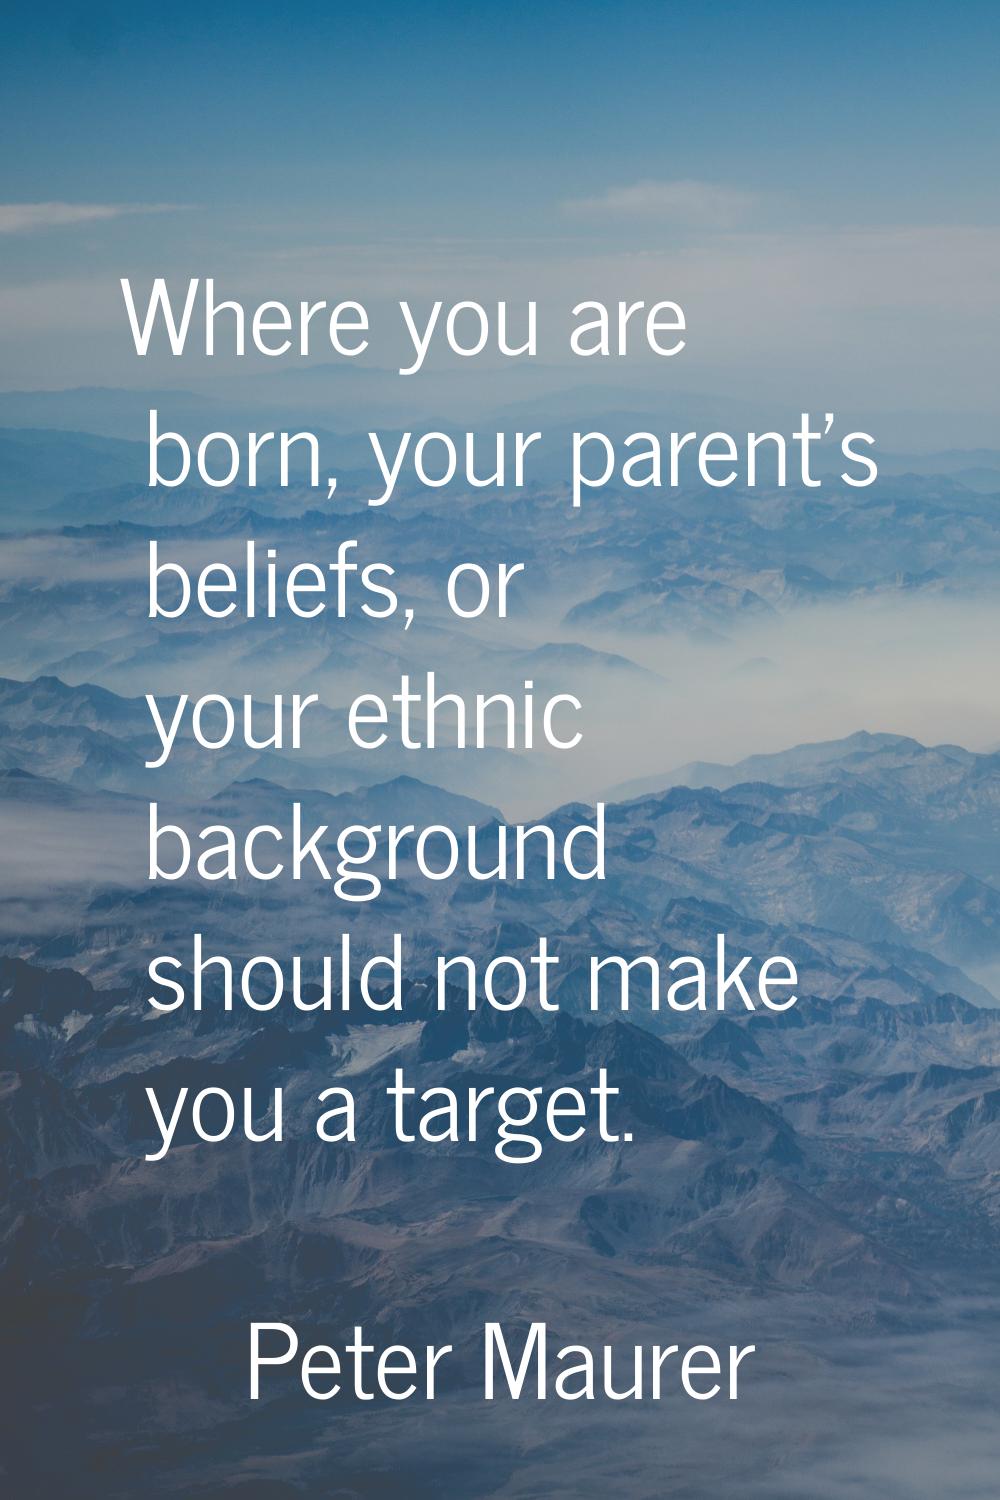 Where you are born, your parent's beliefs, or your ethnic background should not make you a target.